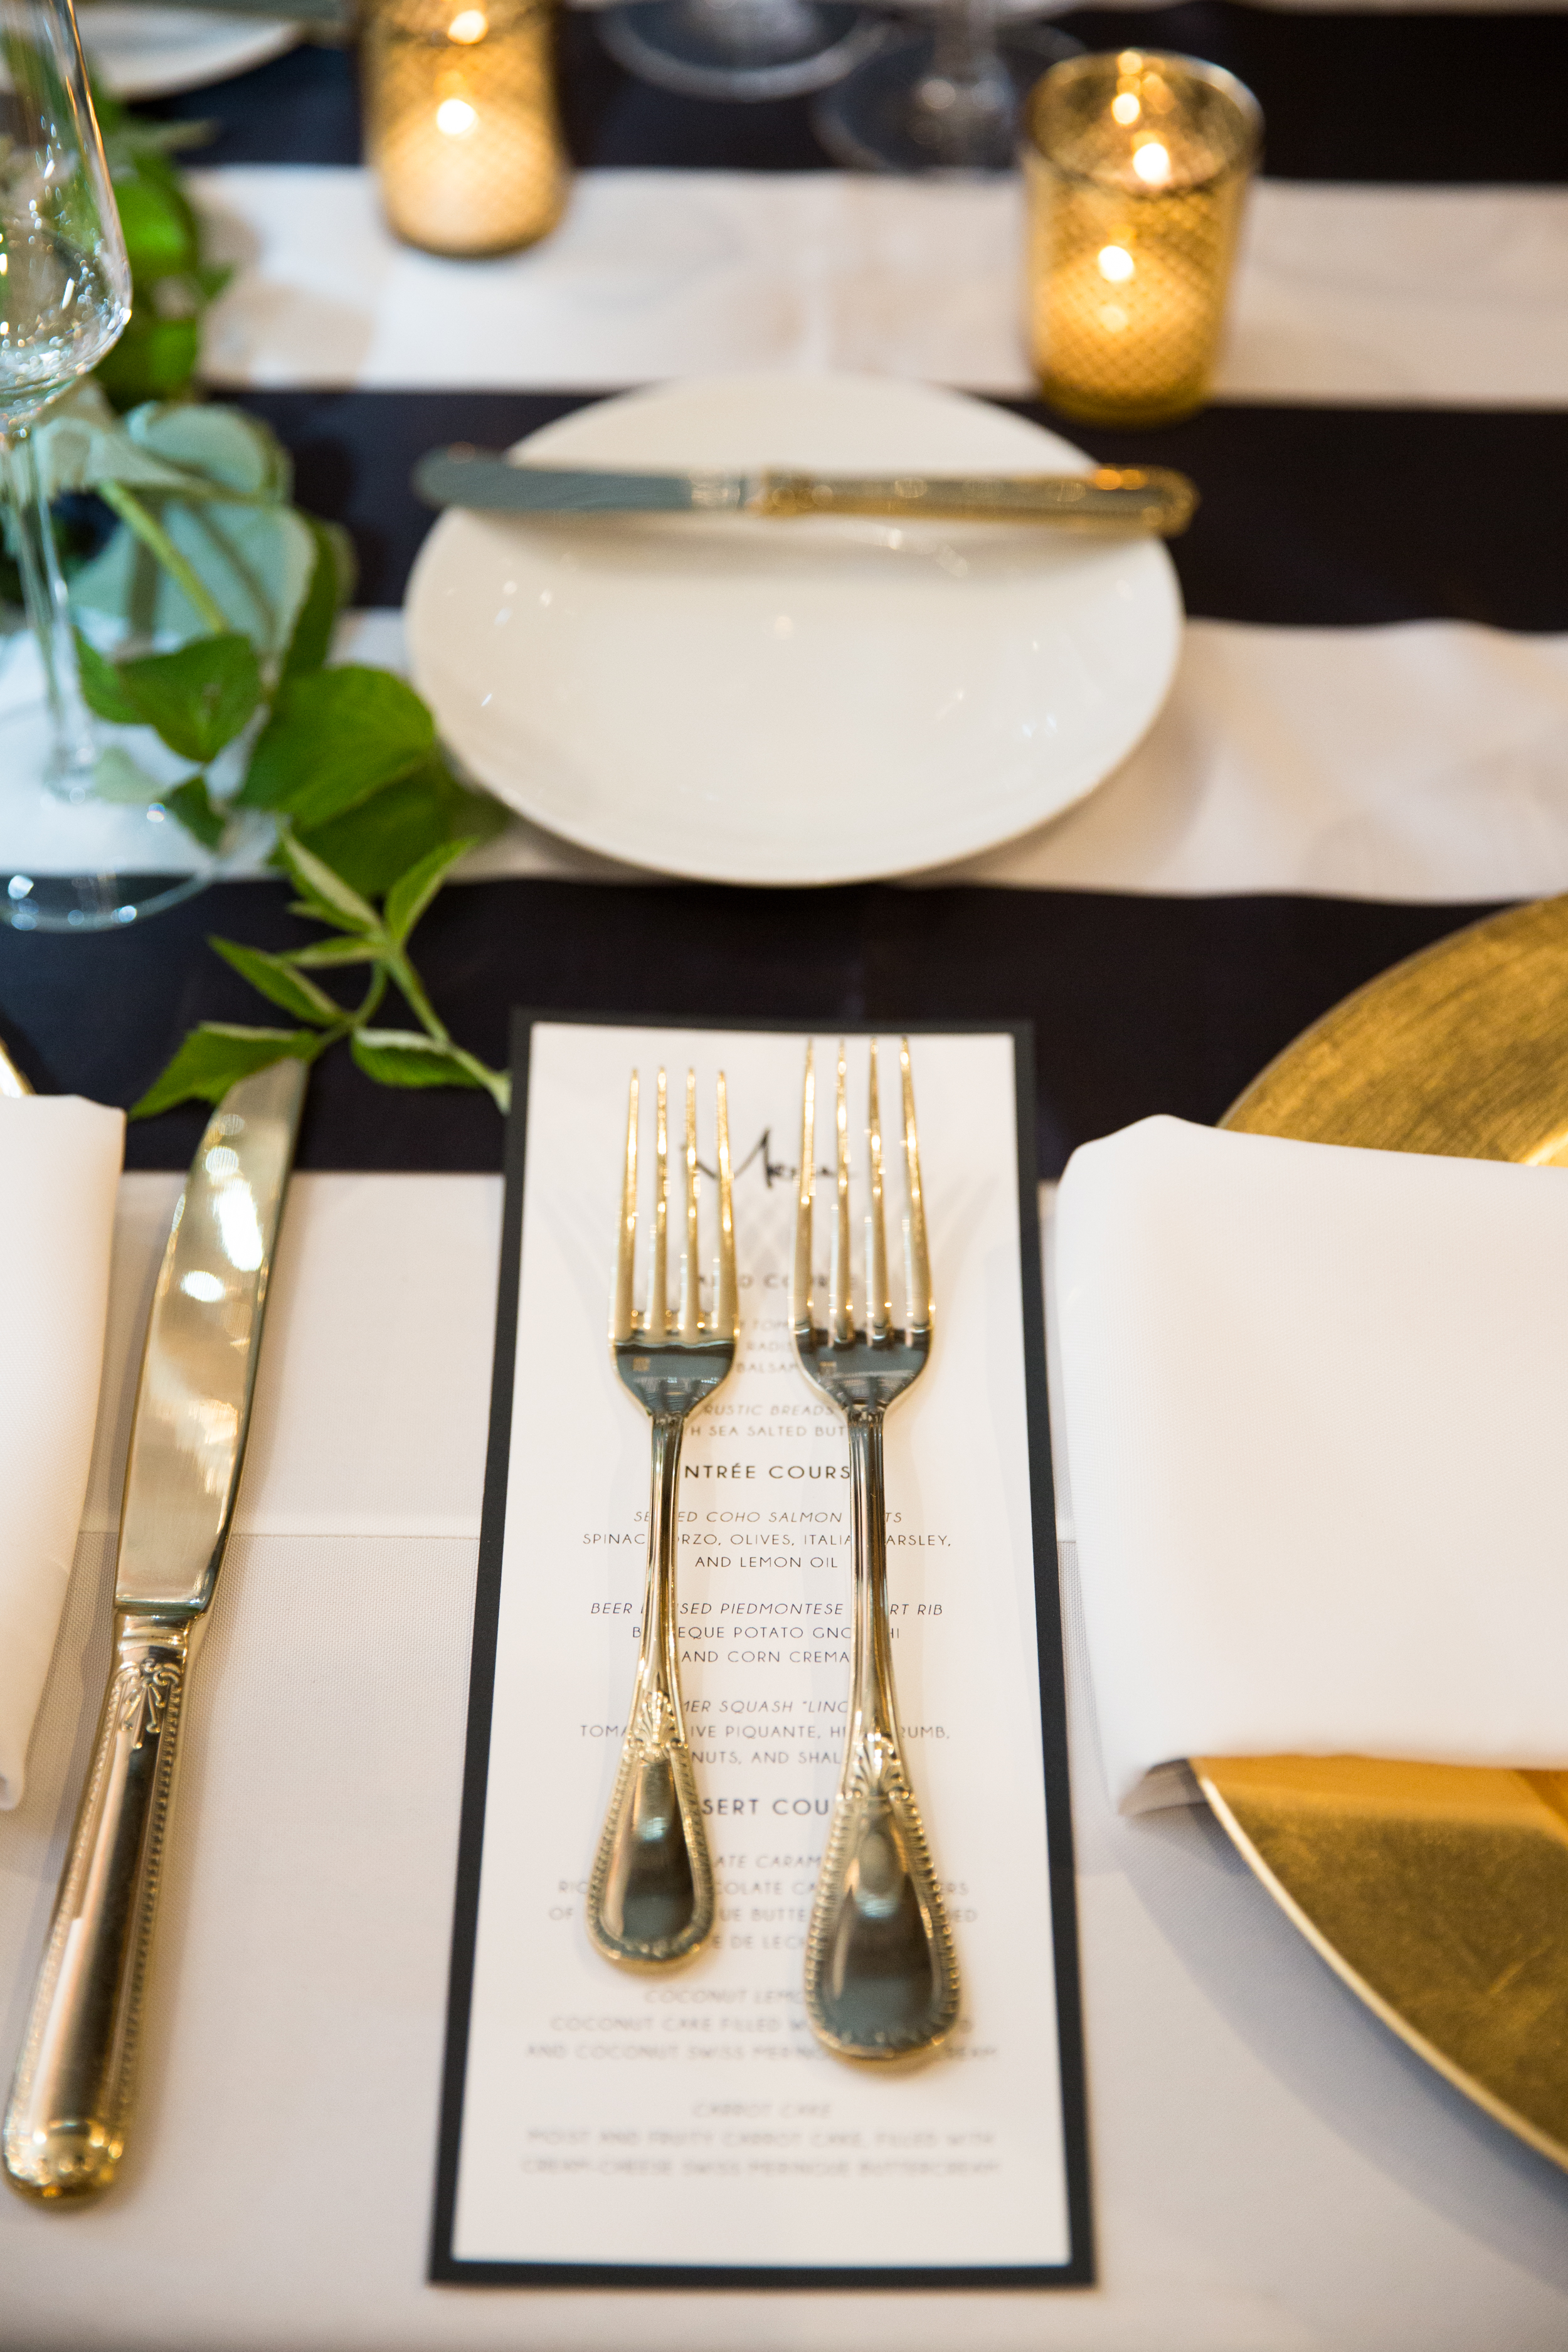 Gold Wedding Silverware | Gold Utensils | Black White and Gold Wedding | Axis Pioneer Square Wedding | Angela and Evan Photography | Seattle Wedding Planner